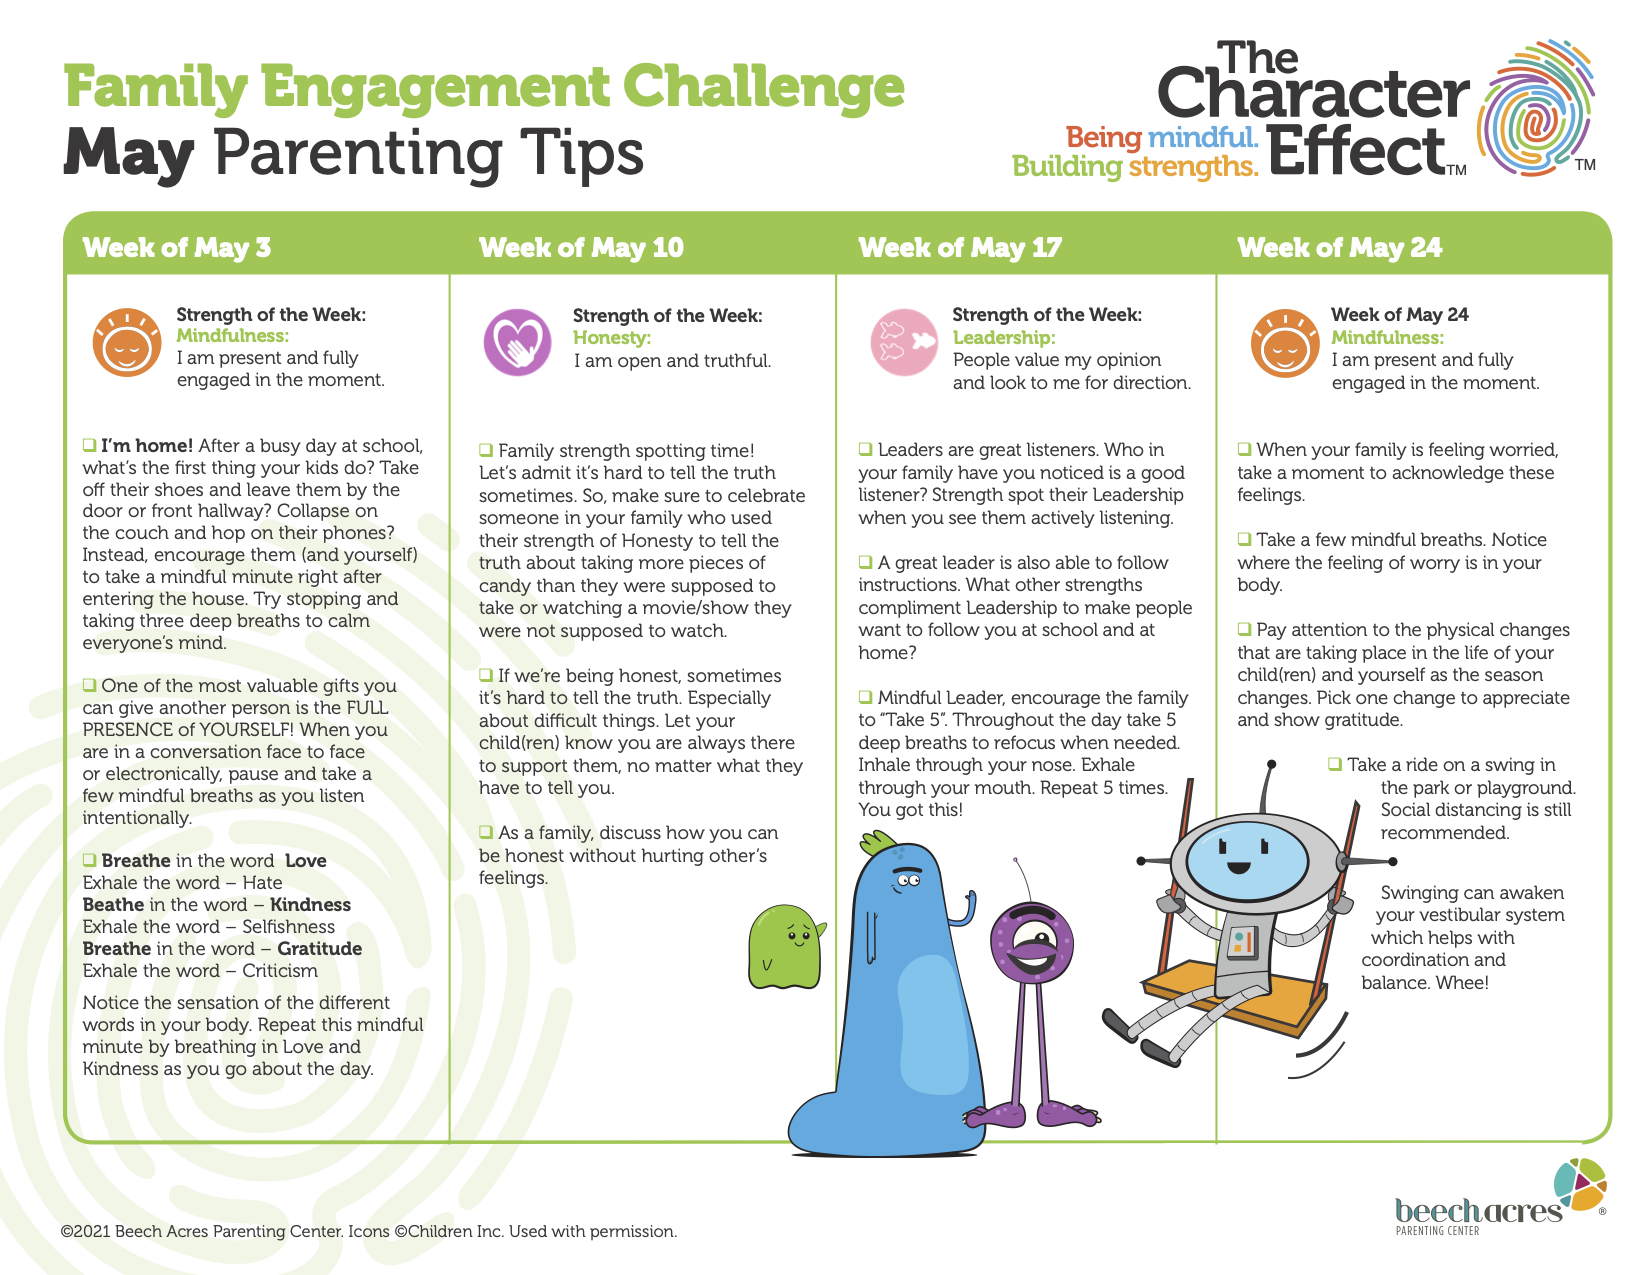 Family Engagement Challenge May 2021